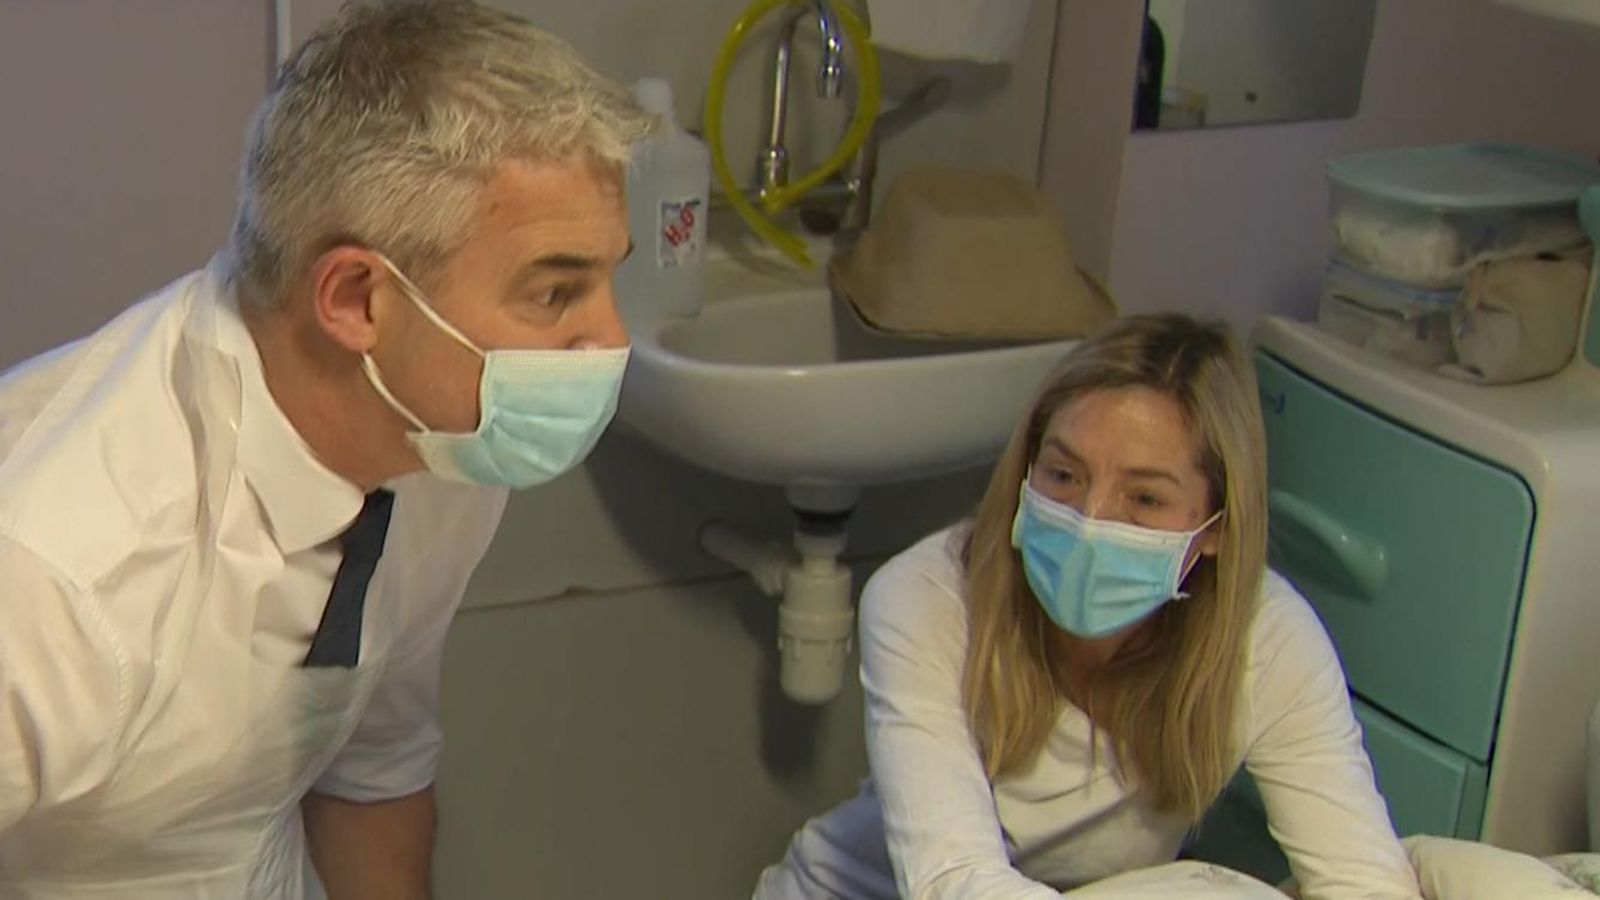 'NHS staff are worked to the bone': Health secretary Steve Barclay challenged by mother during hospital visit